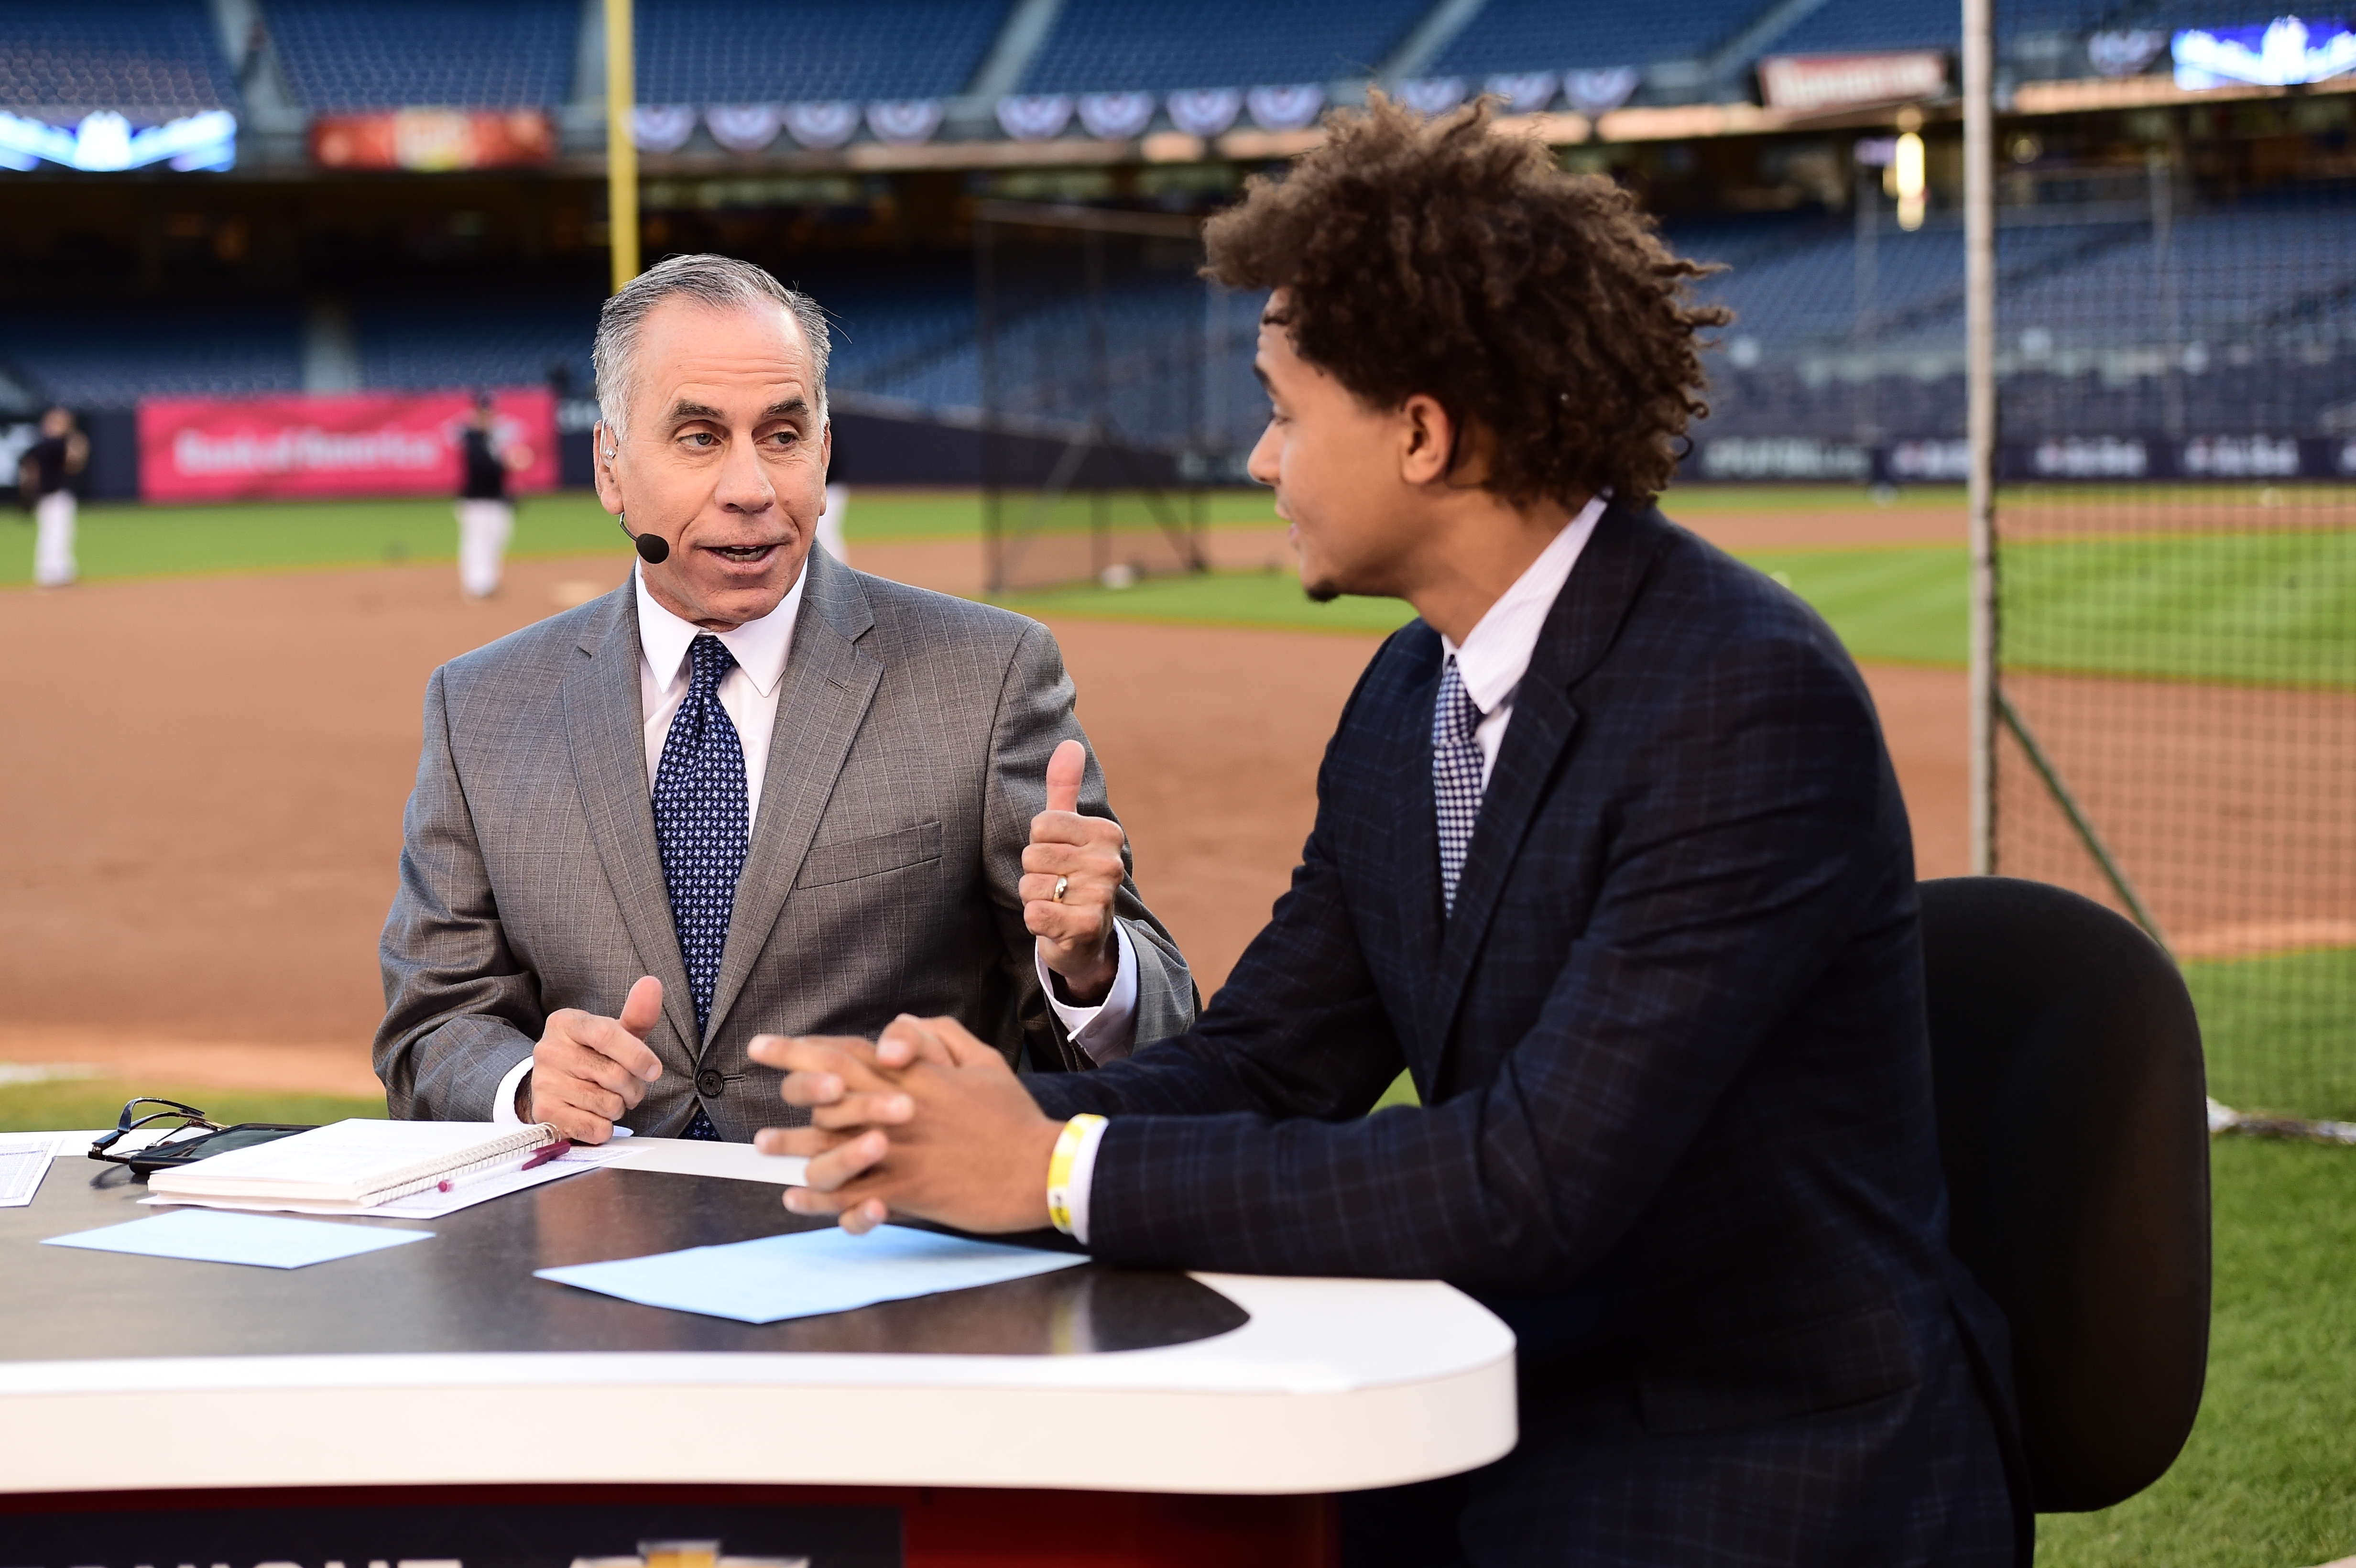 Tim Kurkjian and Tampa Bay Rays star pitcher Chris Archer on the set of Baseball Tonight at the 2015 American League Wild Card Game. Archer will return to ESPN this week for World Series coverage. (Ben Solomon/ESPN Images)